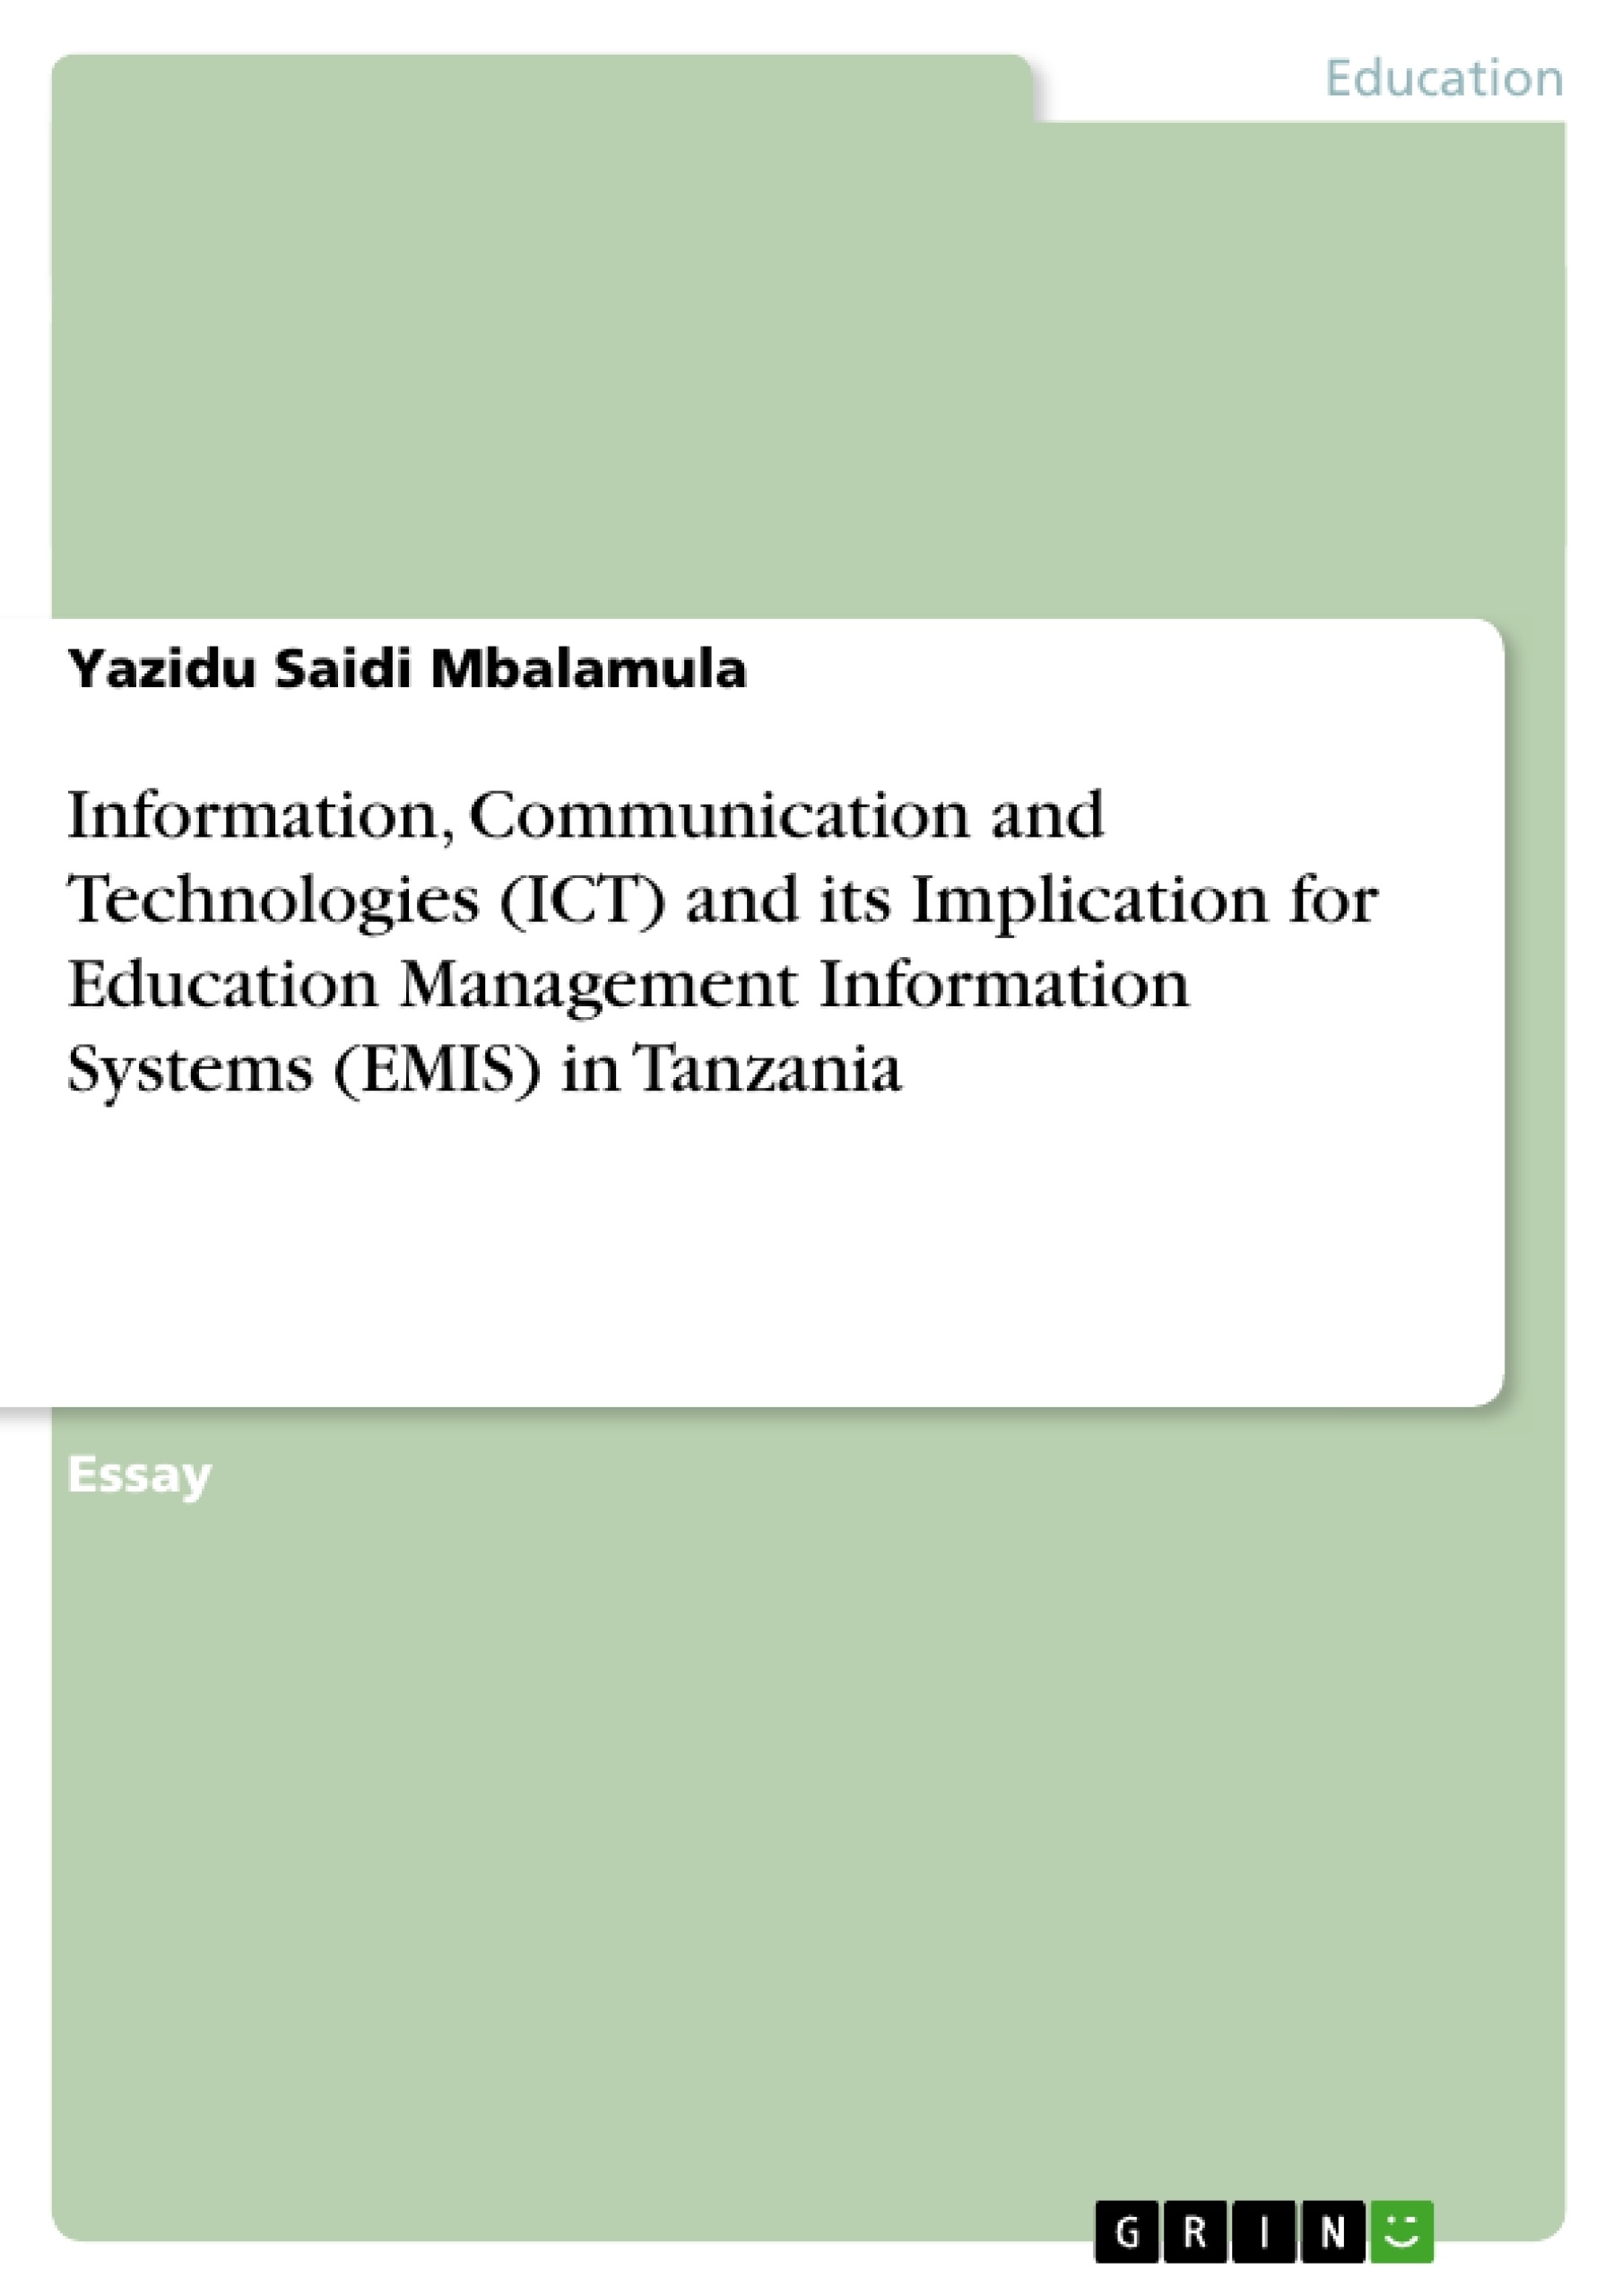 Title: Information, Communication and Technologies (ICT) and its Implication for Education Management Information Systems (EMIS) in Tanzania